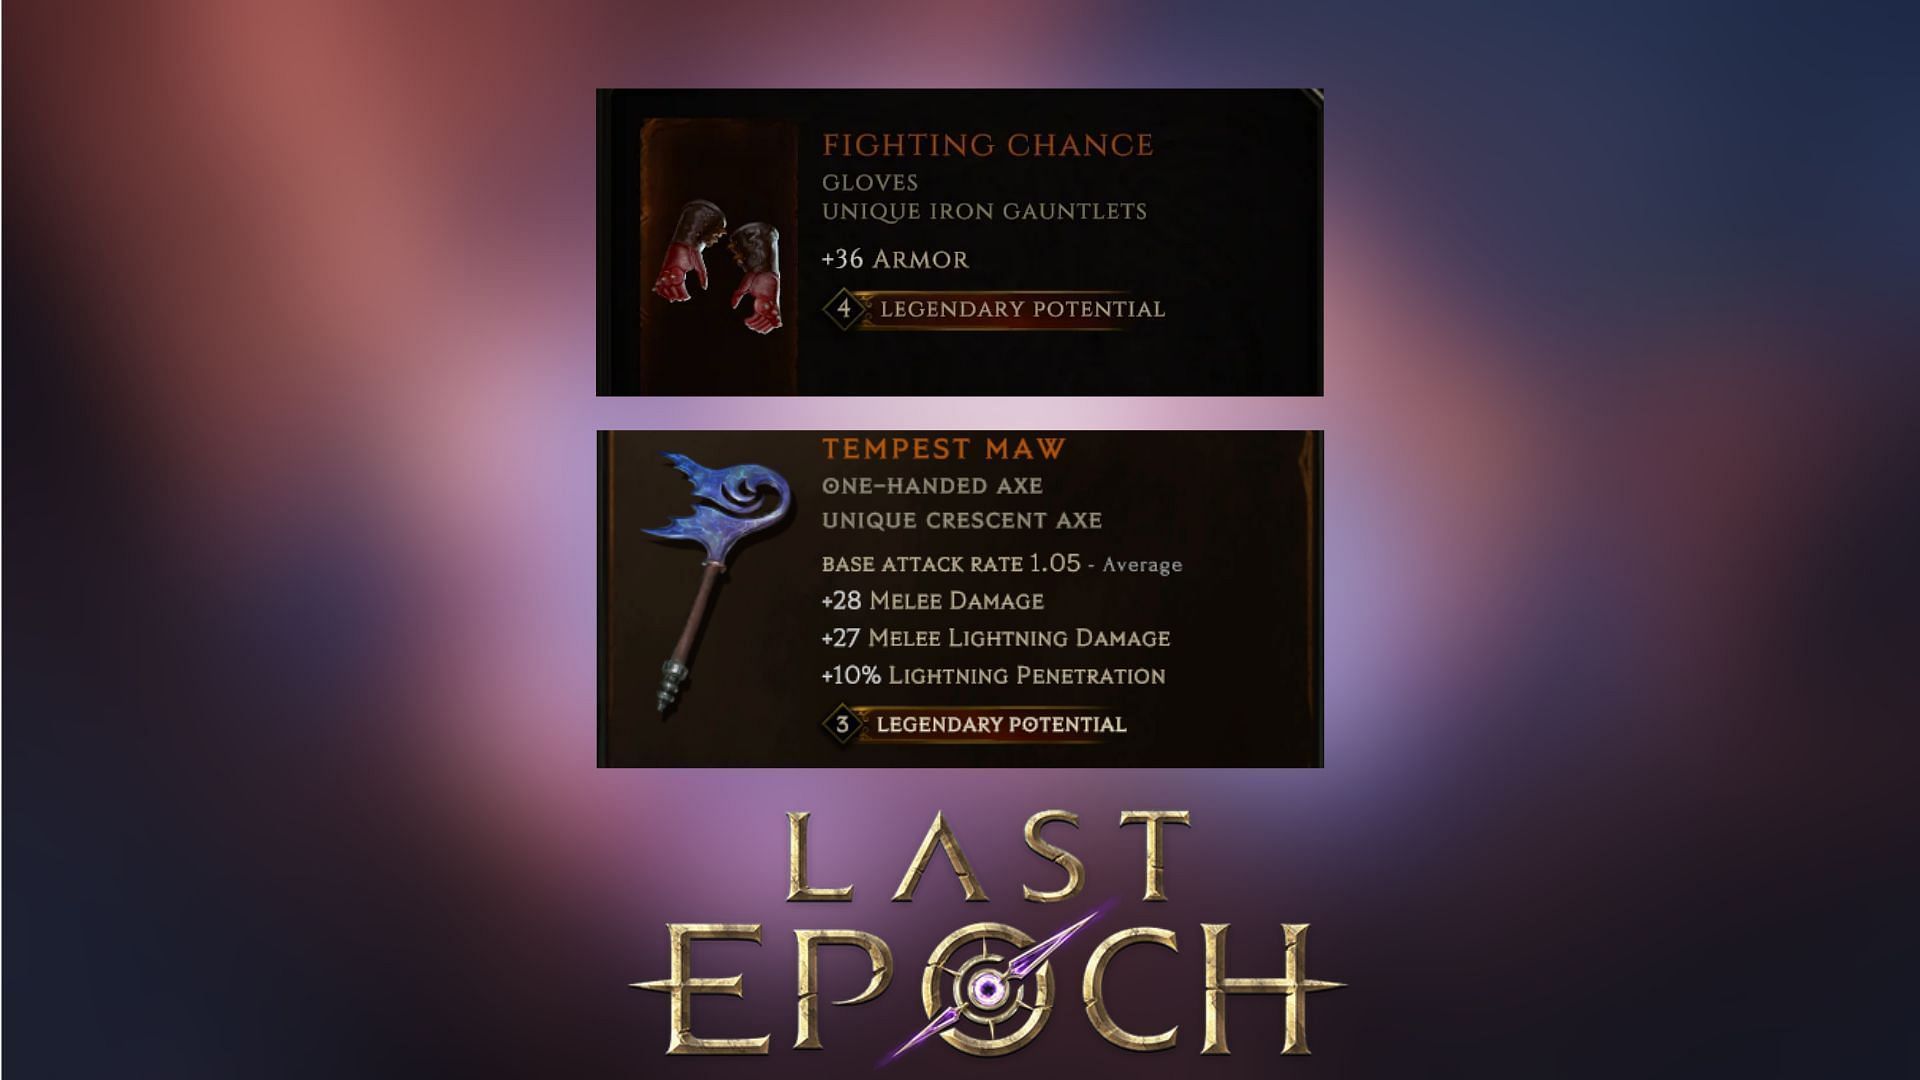 The Legendary Forging Potential in Last Epoch means the number of affixes the item will receive from the Exalted item (Image via Eleventh Hour games)